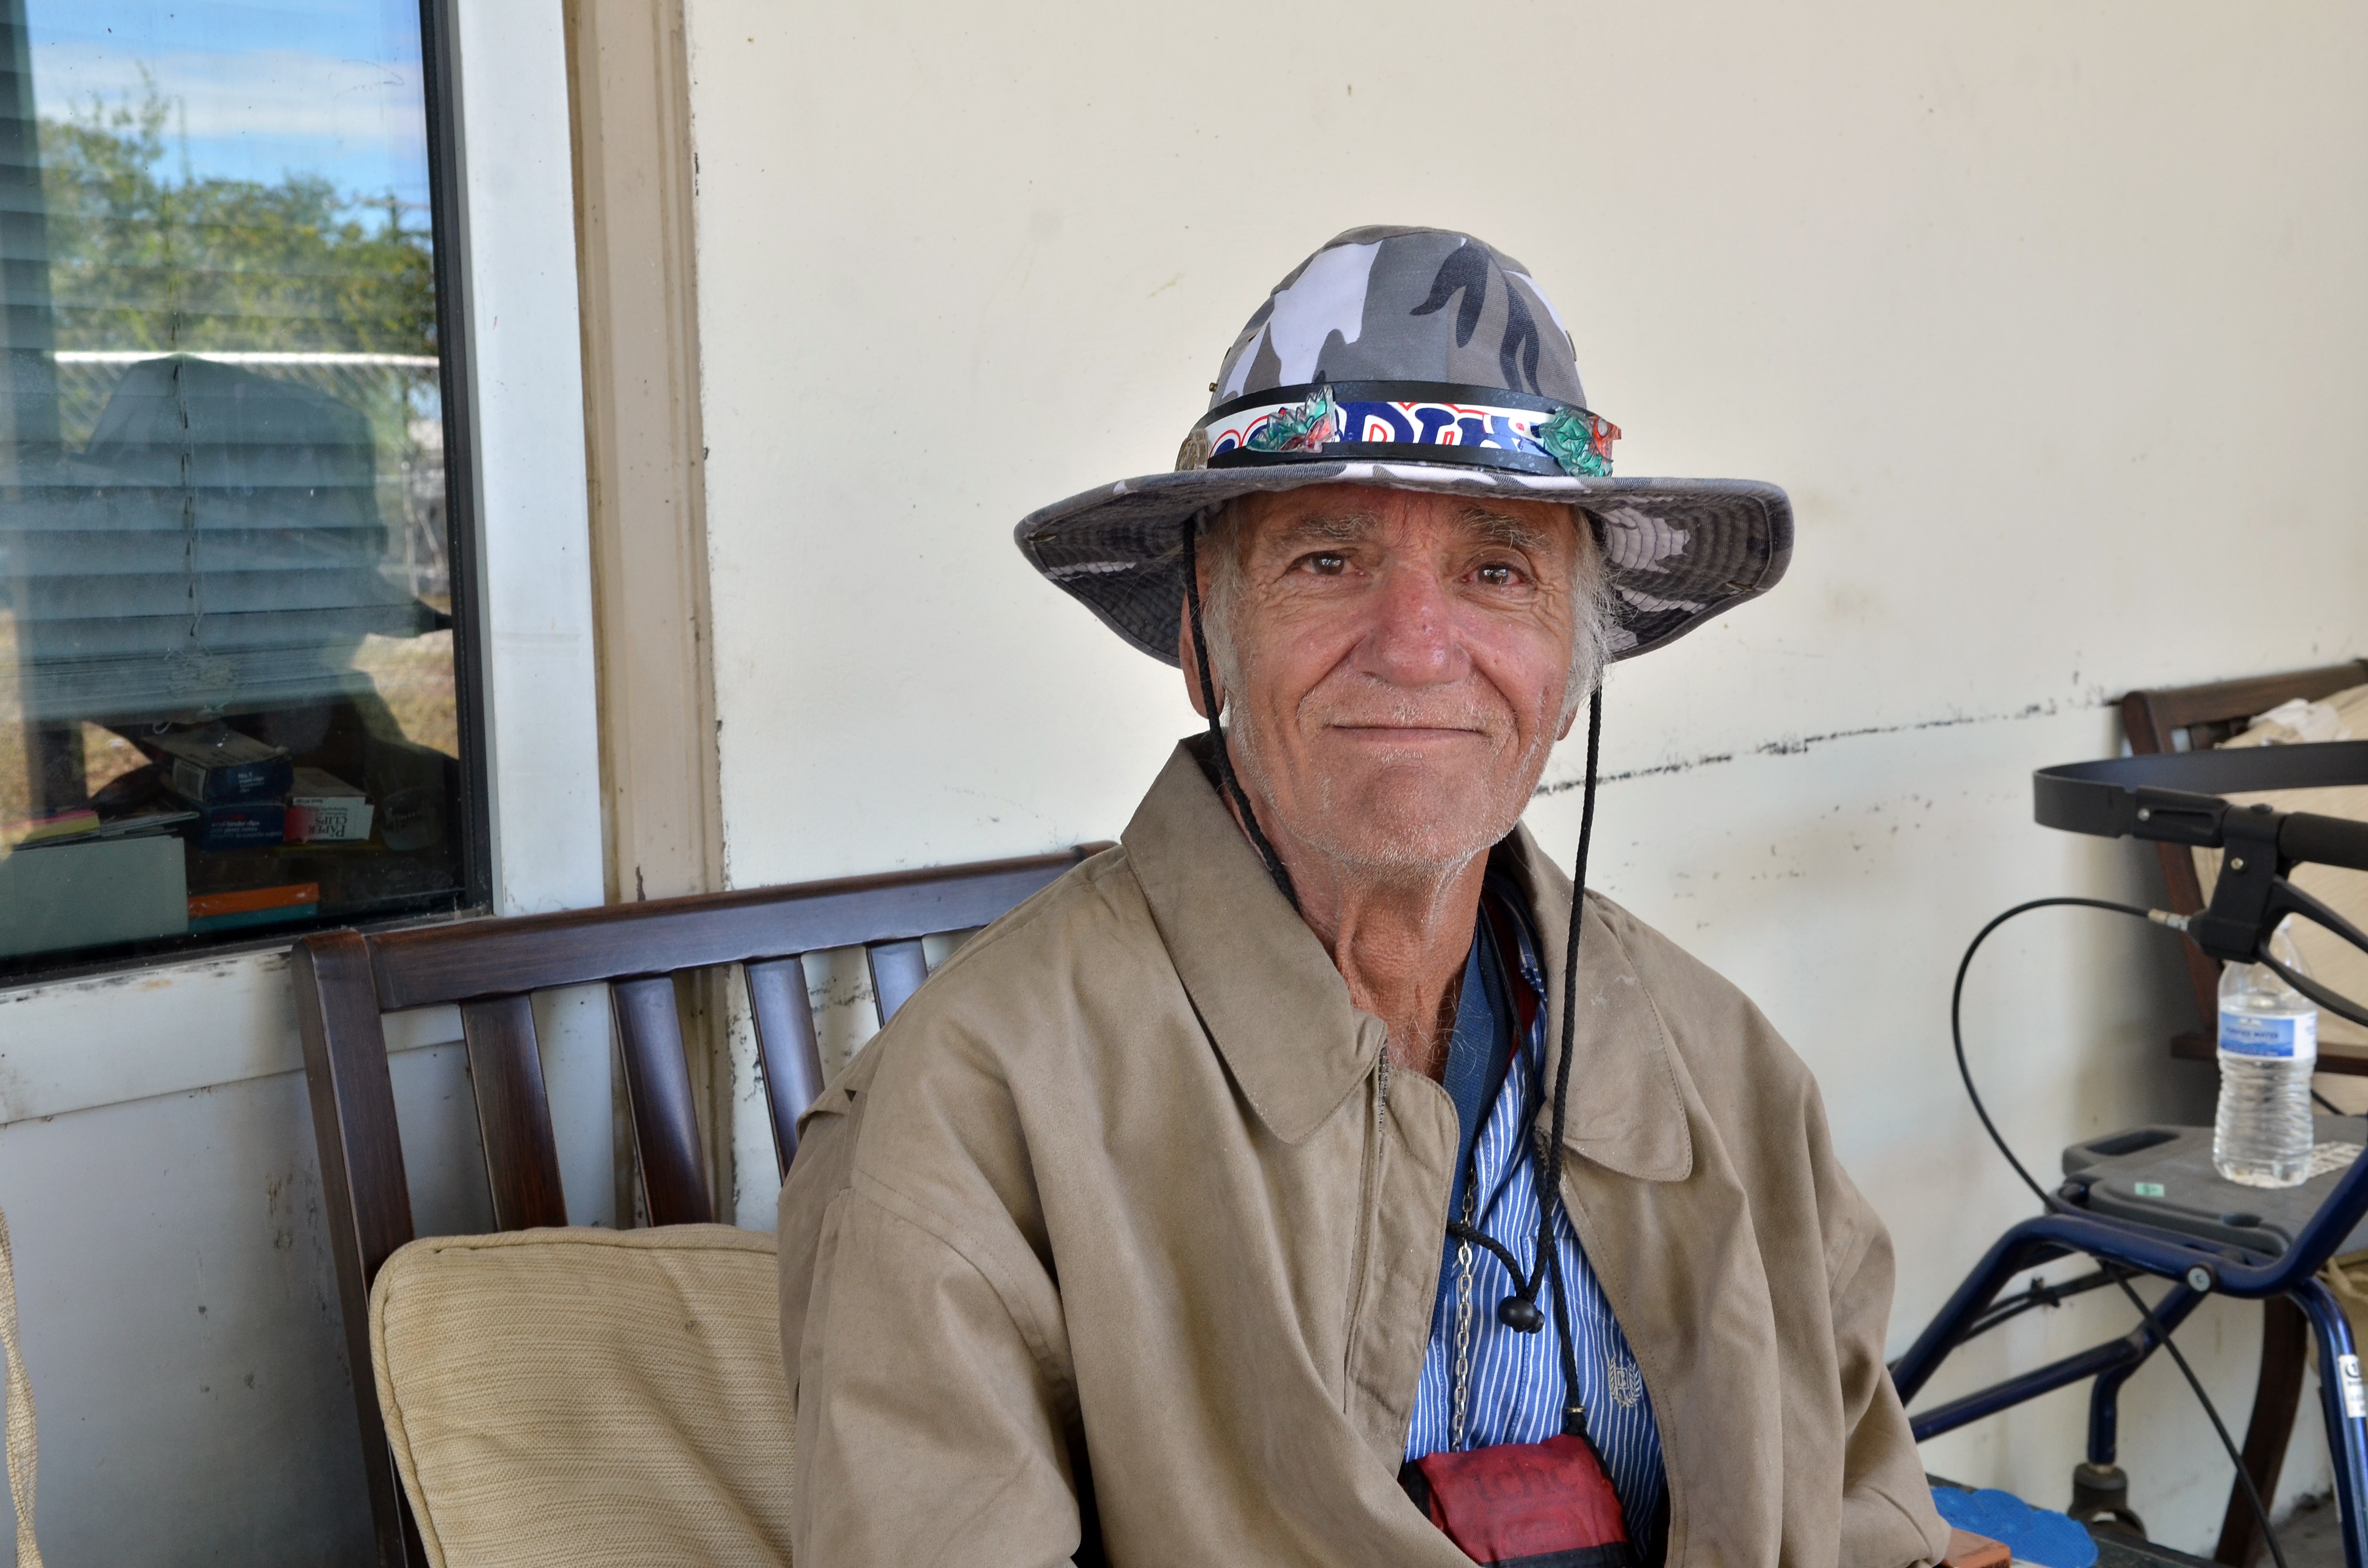 a veteran wearing a hat smiles at the camera